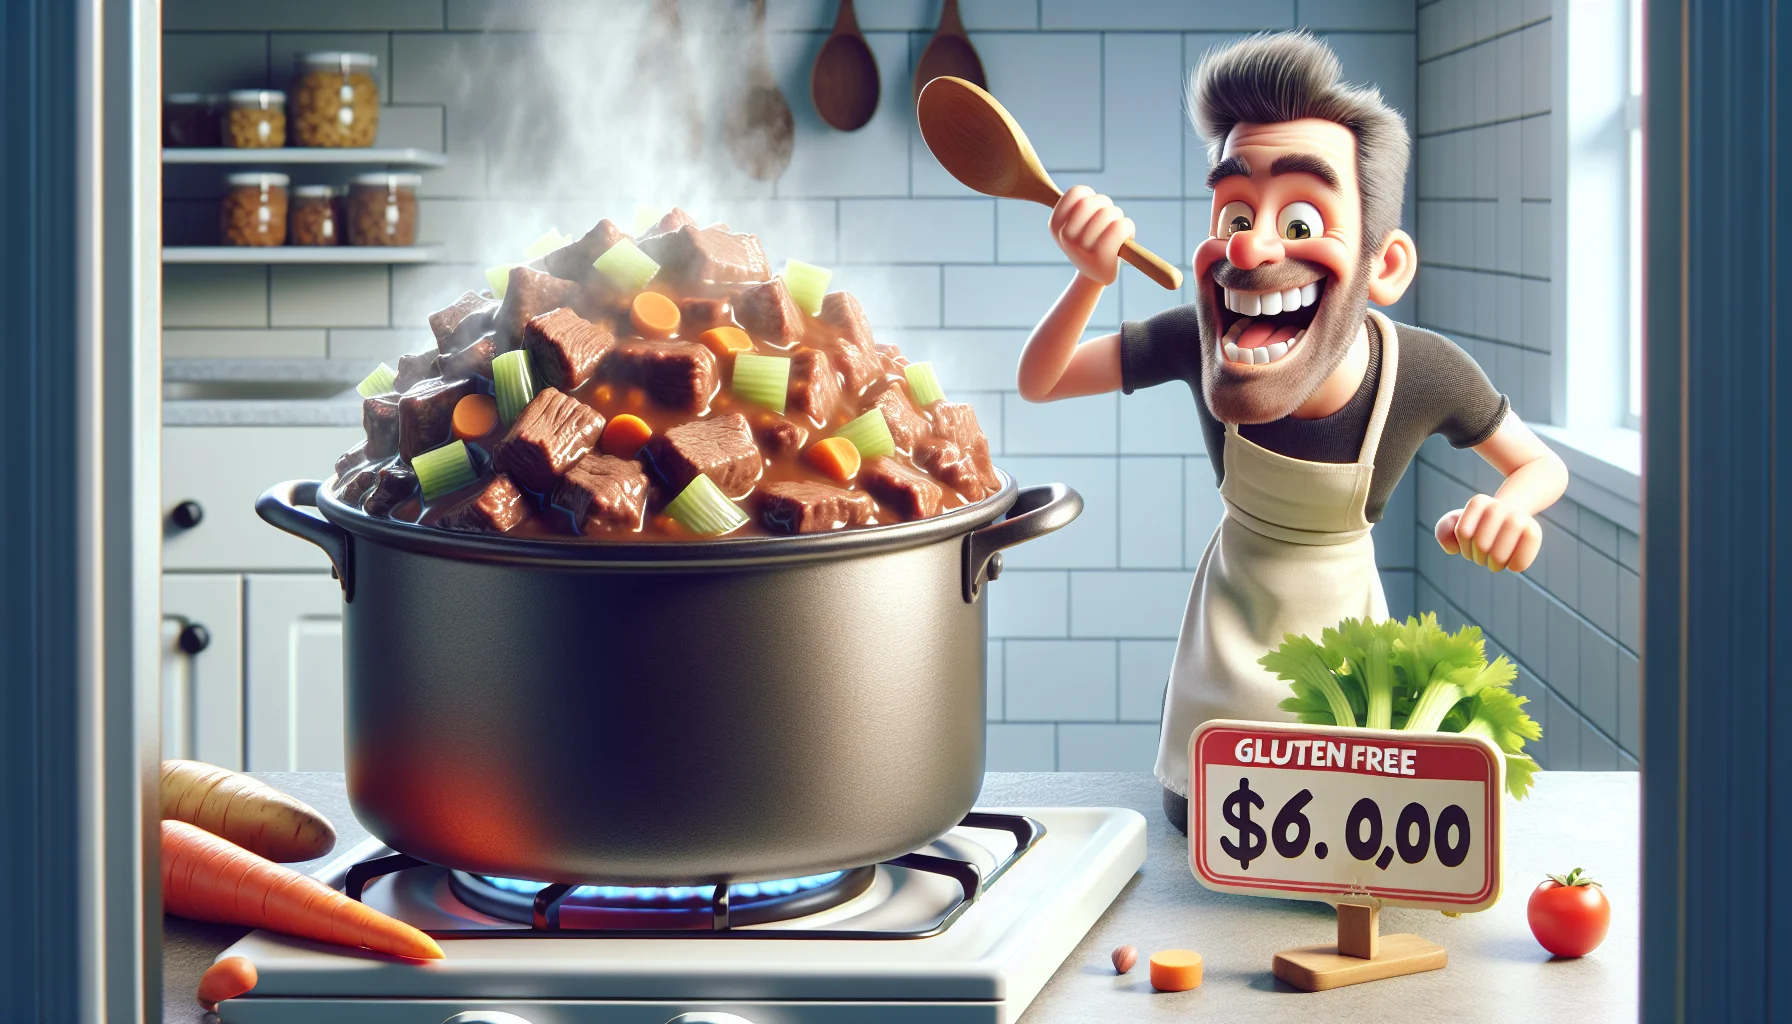 An amusing scene where a large pot of delicious looking, gluten-free beef stew is bubbling away on a modest stove. A cartoon chef with a wide grin, wearing an apron, is leaning over the pot, playfully poking at the stew with a wooden spoon. The chef has a magnified body to accentuate the comedic effect. The stew is full of visible ingredients - chunks of beef, carrots, celery, and potatoes, all steamy and inviting. Near the stove is a price tag with a surprisingly low cost, enticing viewers to opt for healthy food on a budget.